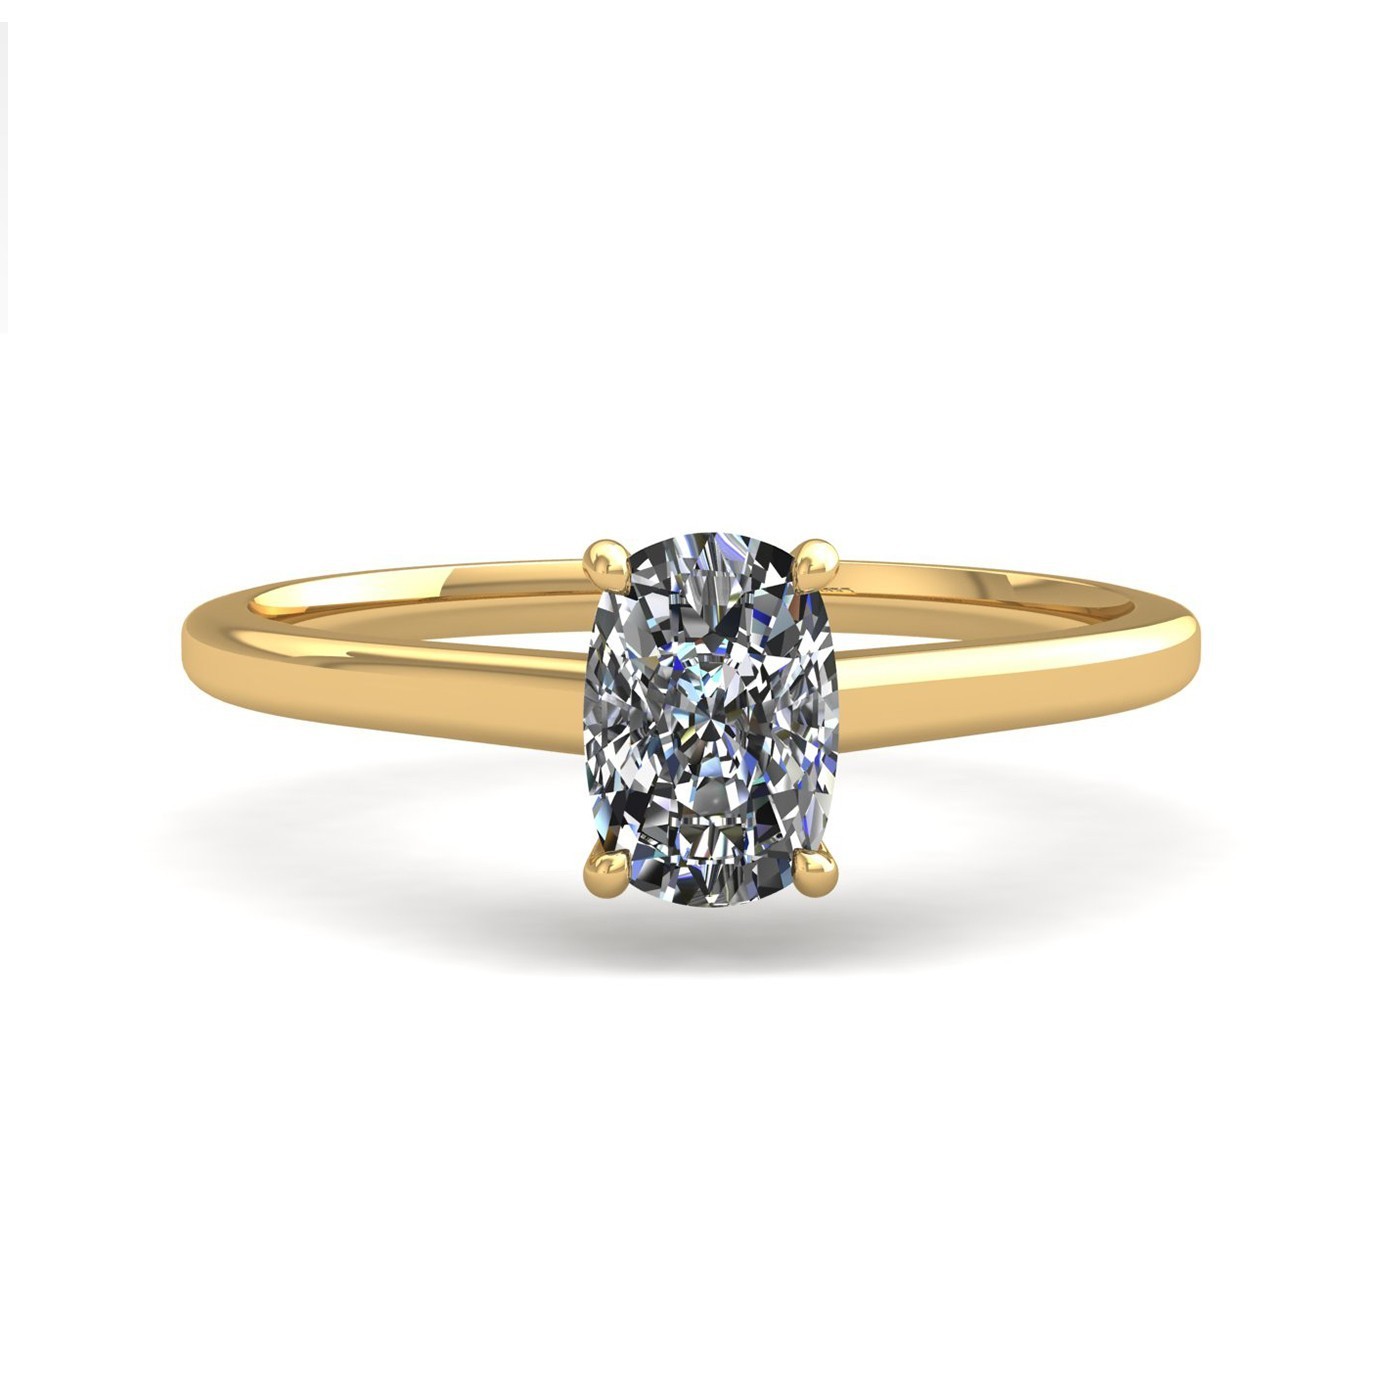 18k yellow gold 1,00 ct 4 prongs solitaire elongated cushion cut diamond engagement ring with whisper thin band